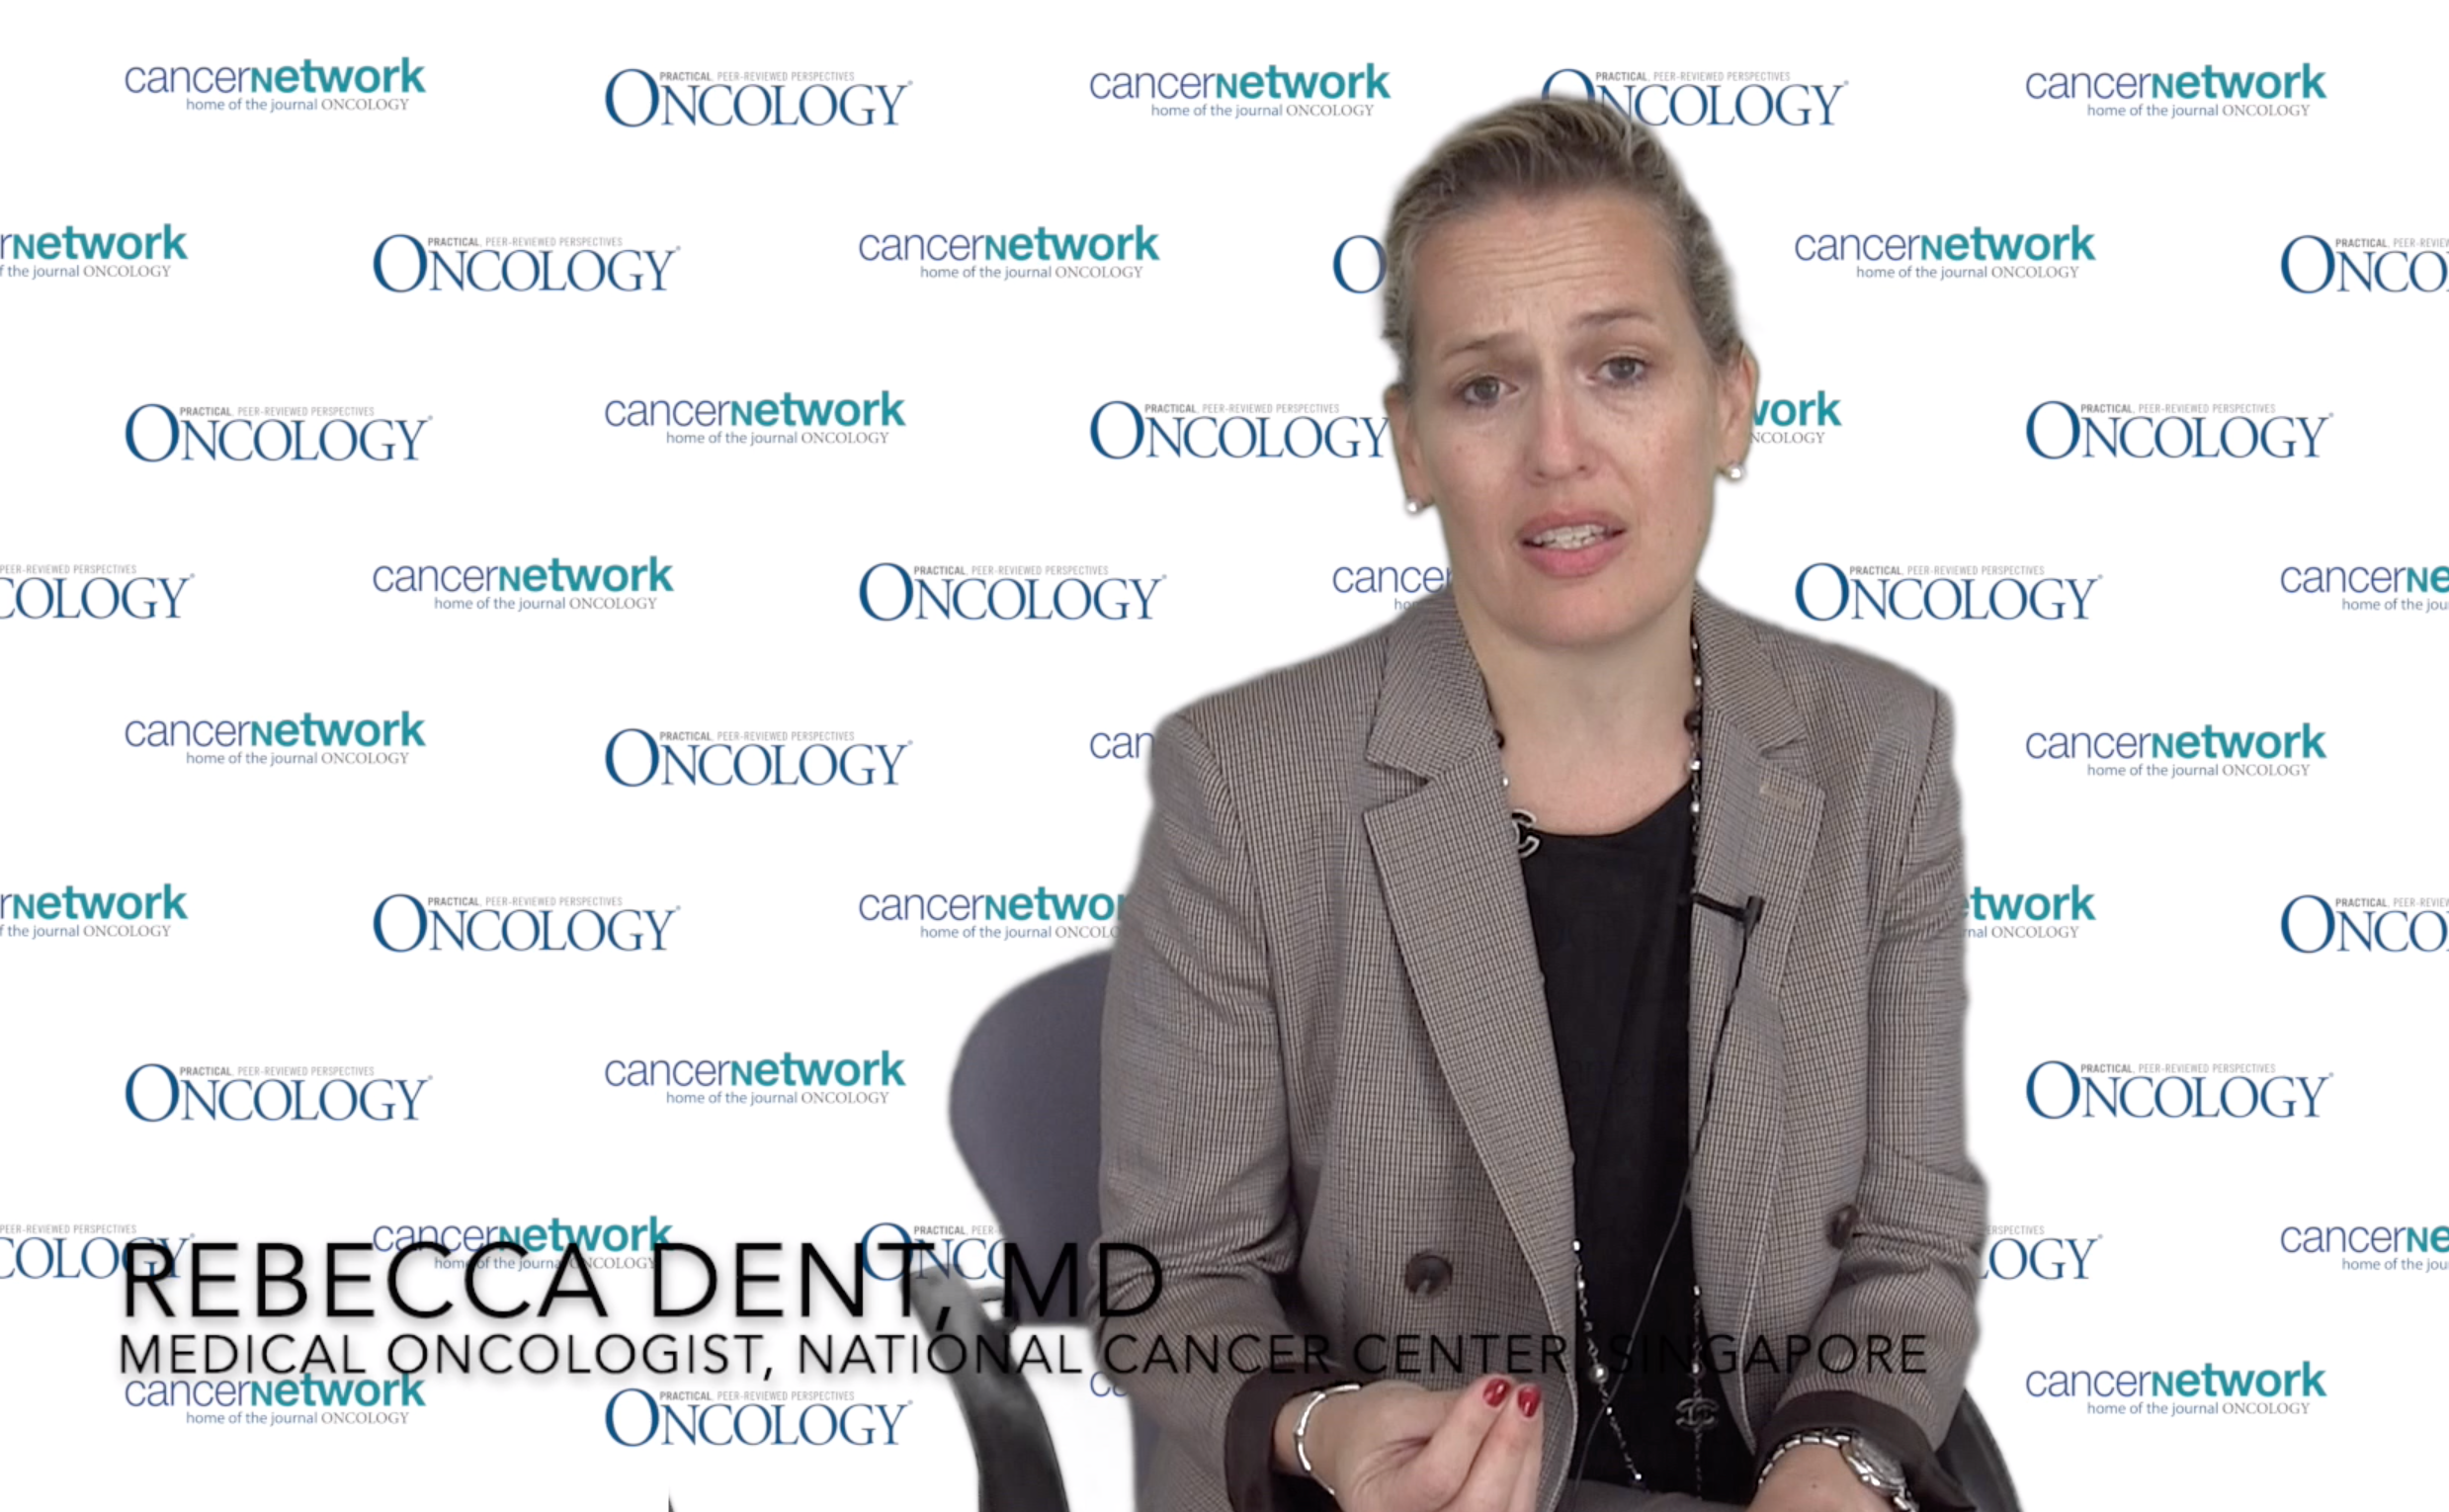 Dr. Dent Discusses Immunotherapy in Early-Stage Breast Cancer